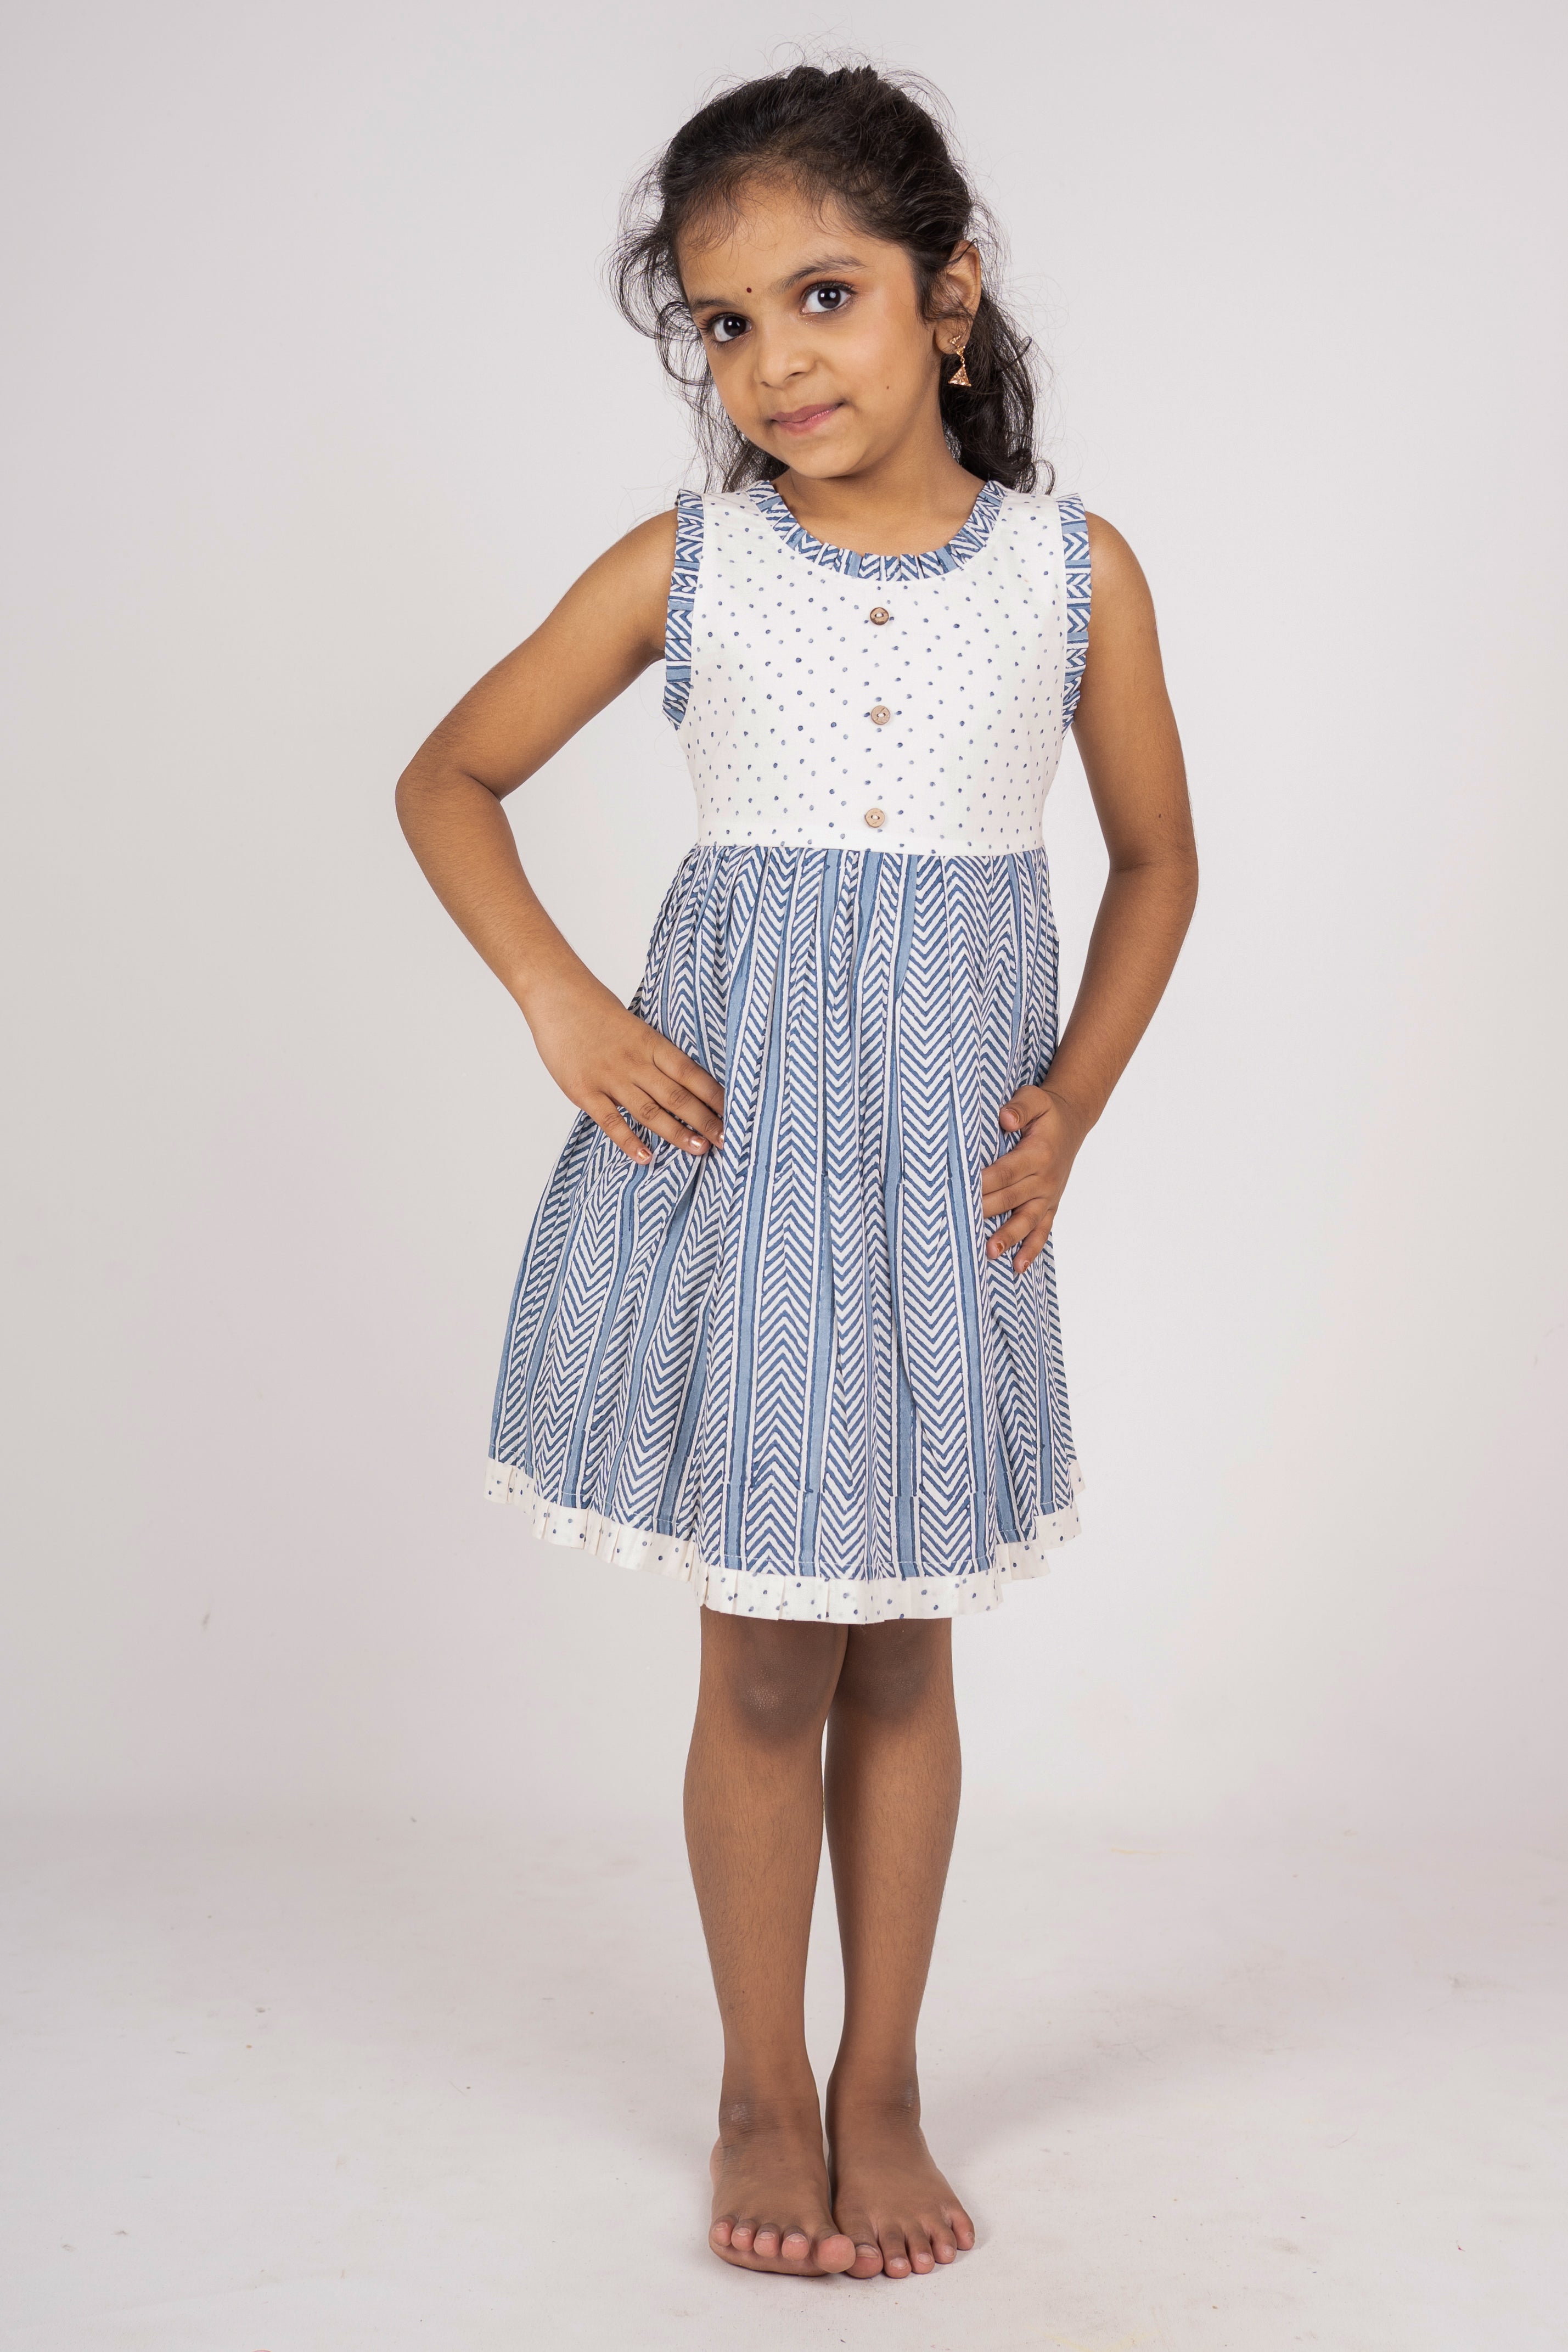 Buy Babyhug Sleeveless Party Wear Frock With Corsage Pink for Girls  912Months Online in India Shop at FirstCrycom  11738774